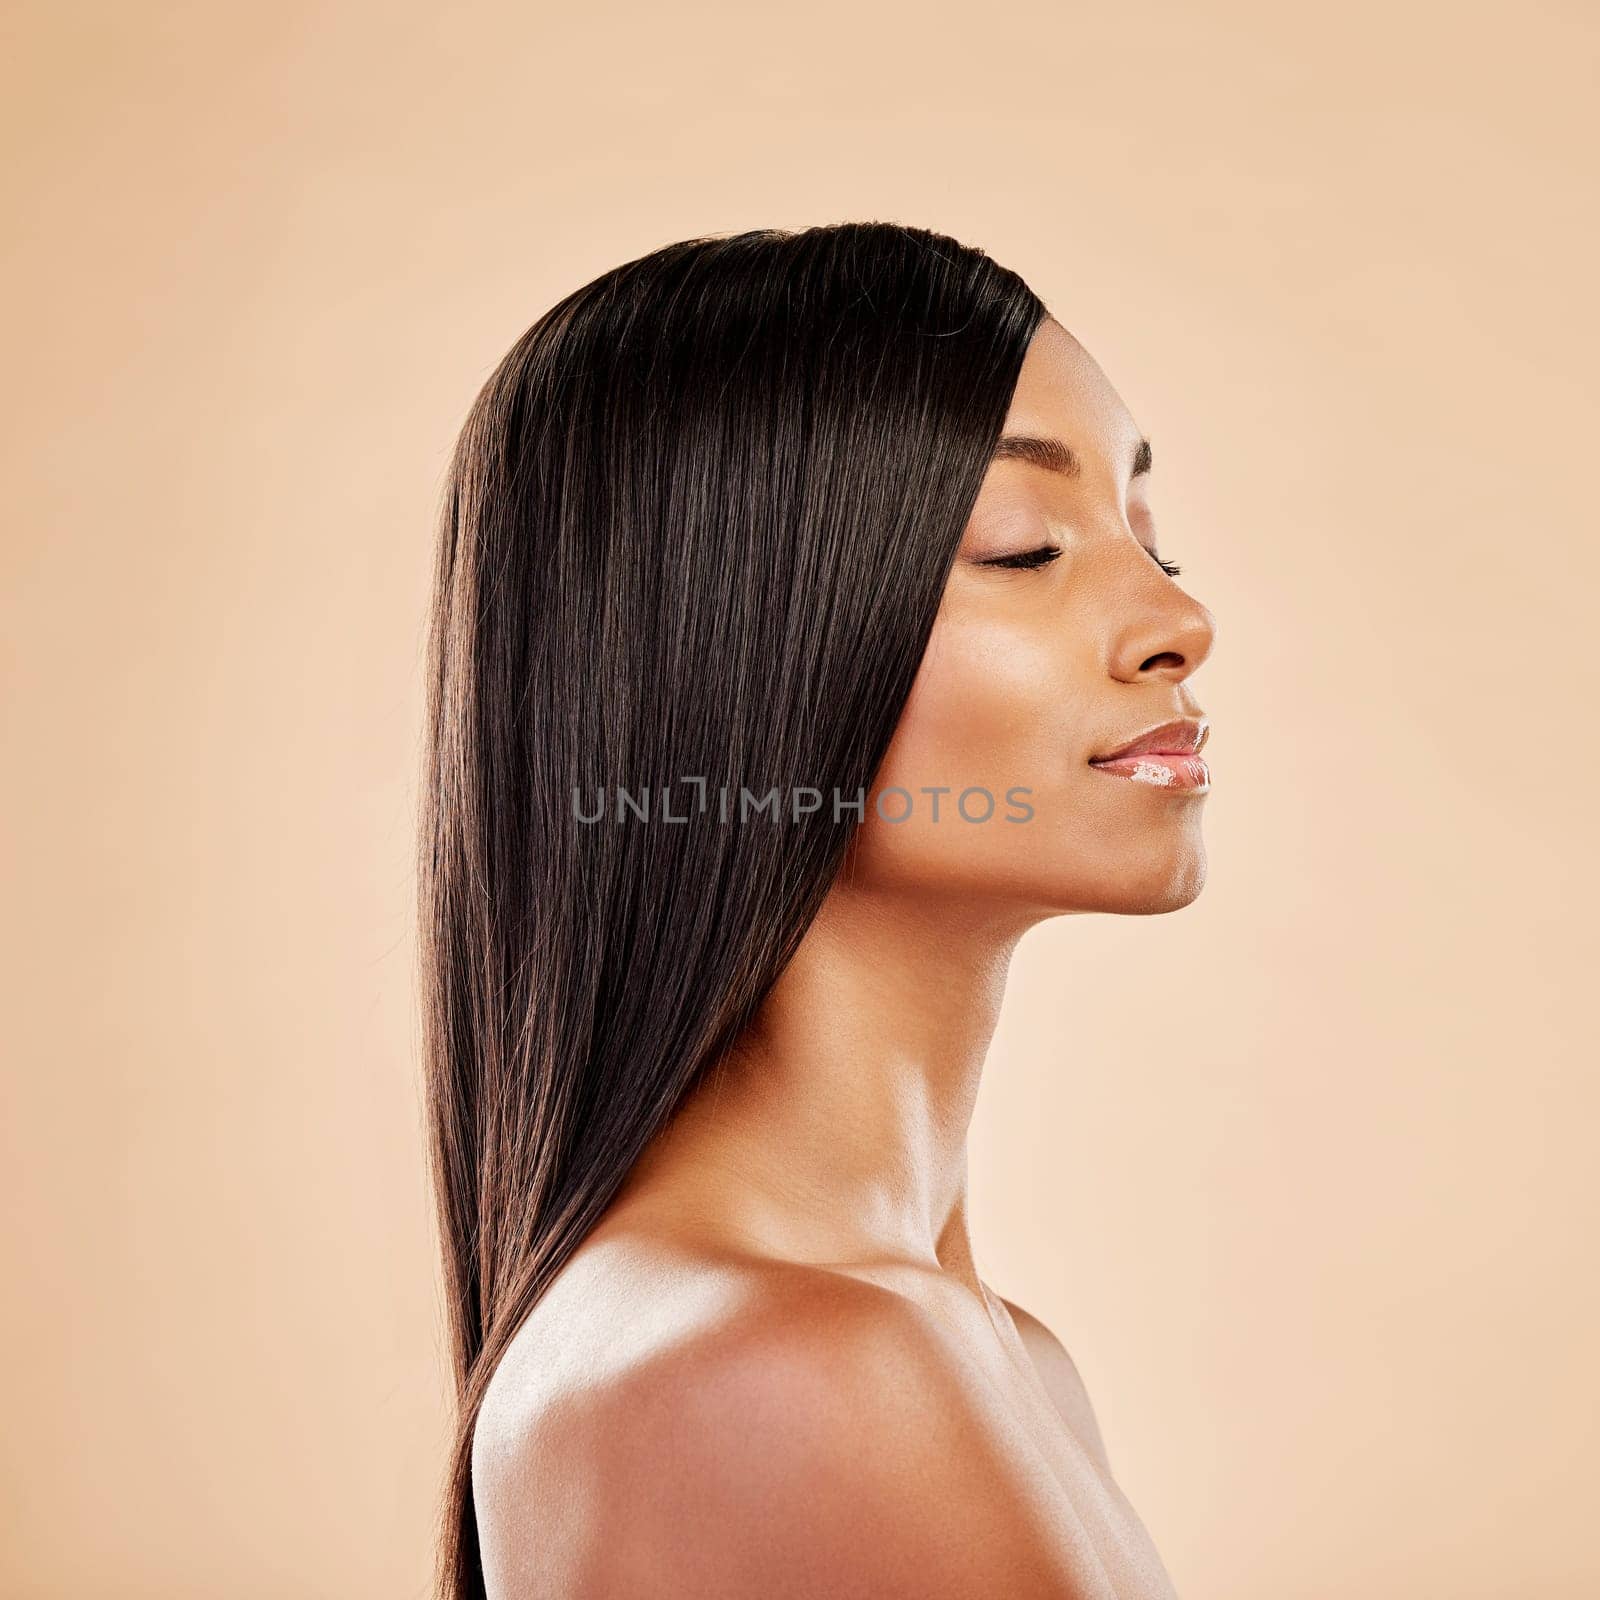 Beauty, hair care and profile of a woman in studio with natural glow and shine. Hairstyle, cosmetics and wellness of Indian person for hairdresser, makeup or salon results on a beige background by YuriArcurs